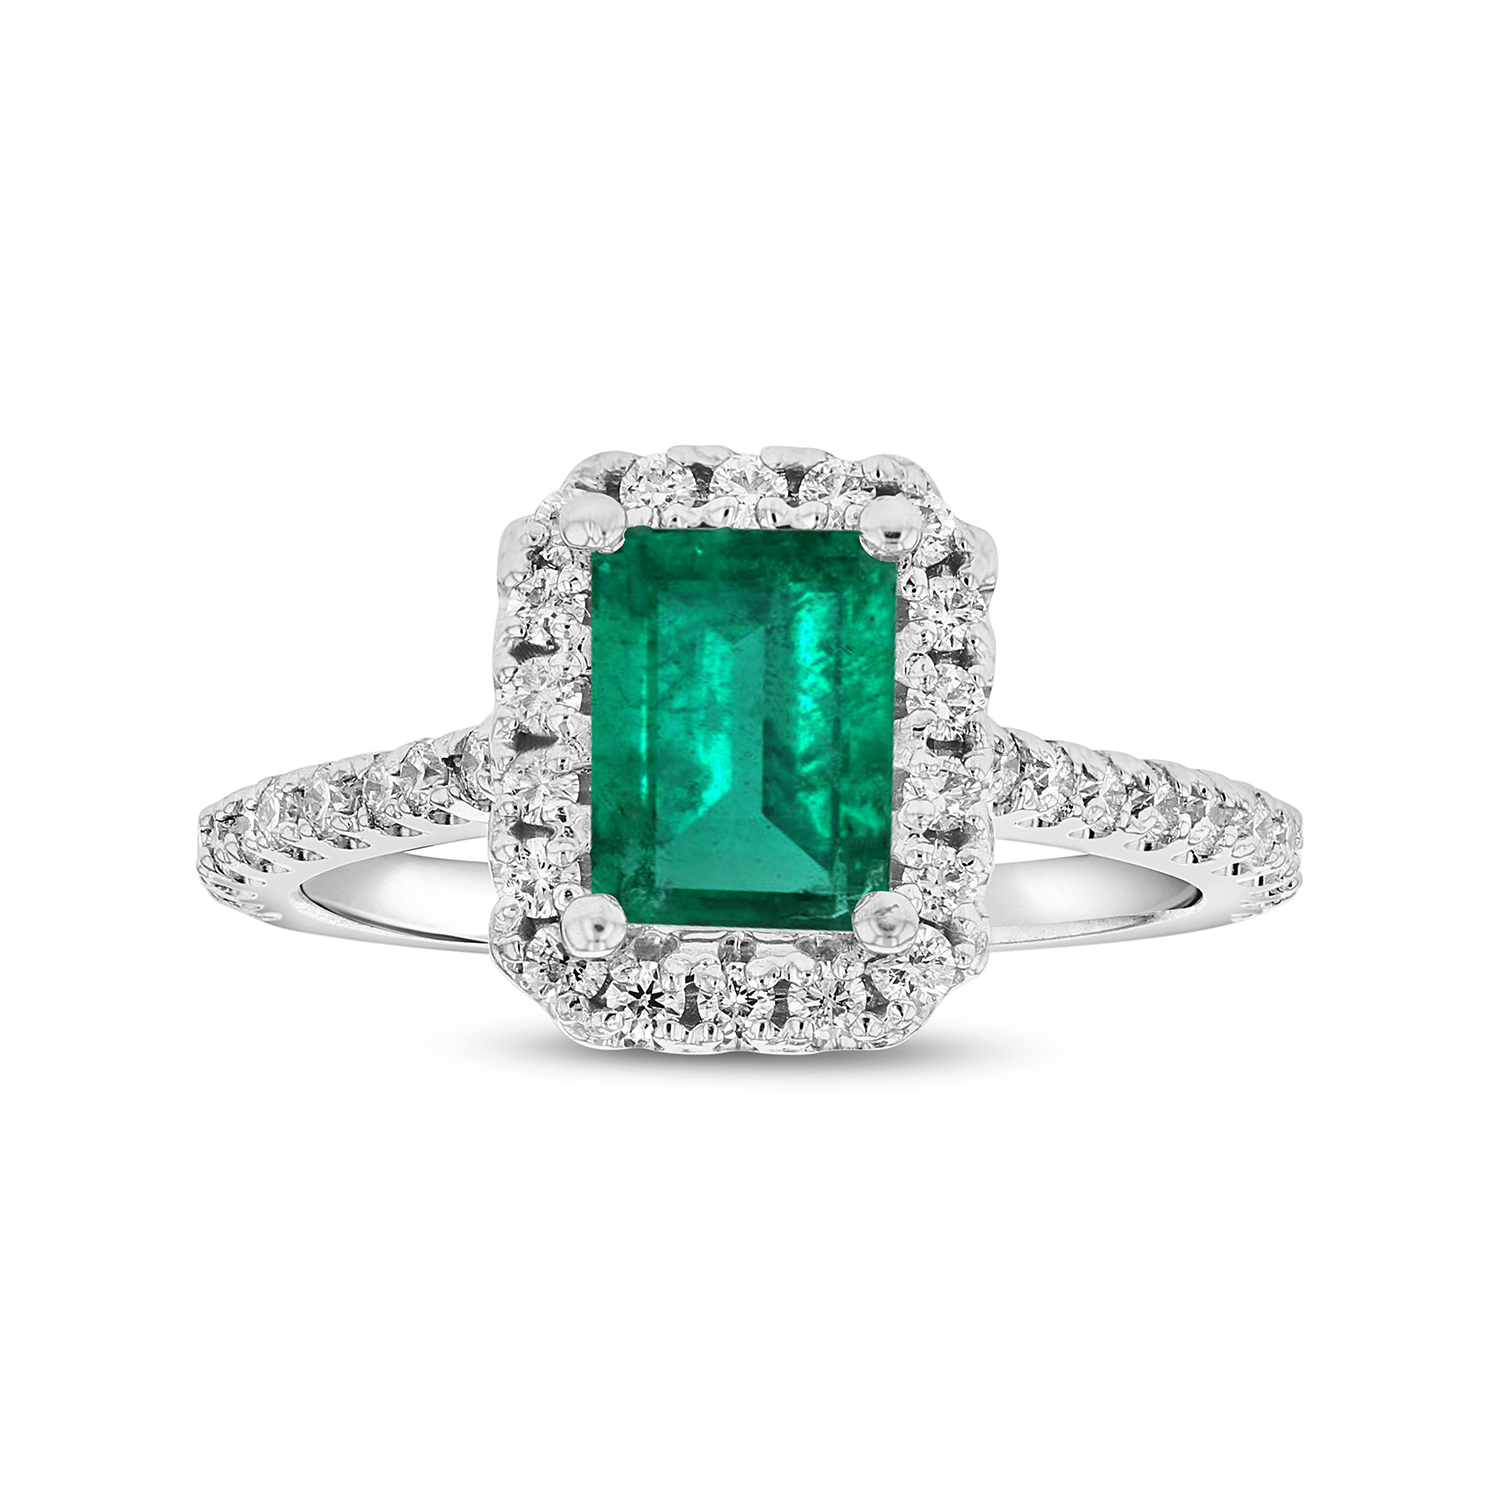 View 2.0ctw Emerald and Diamond Ring in 14k White Gold